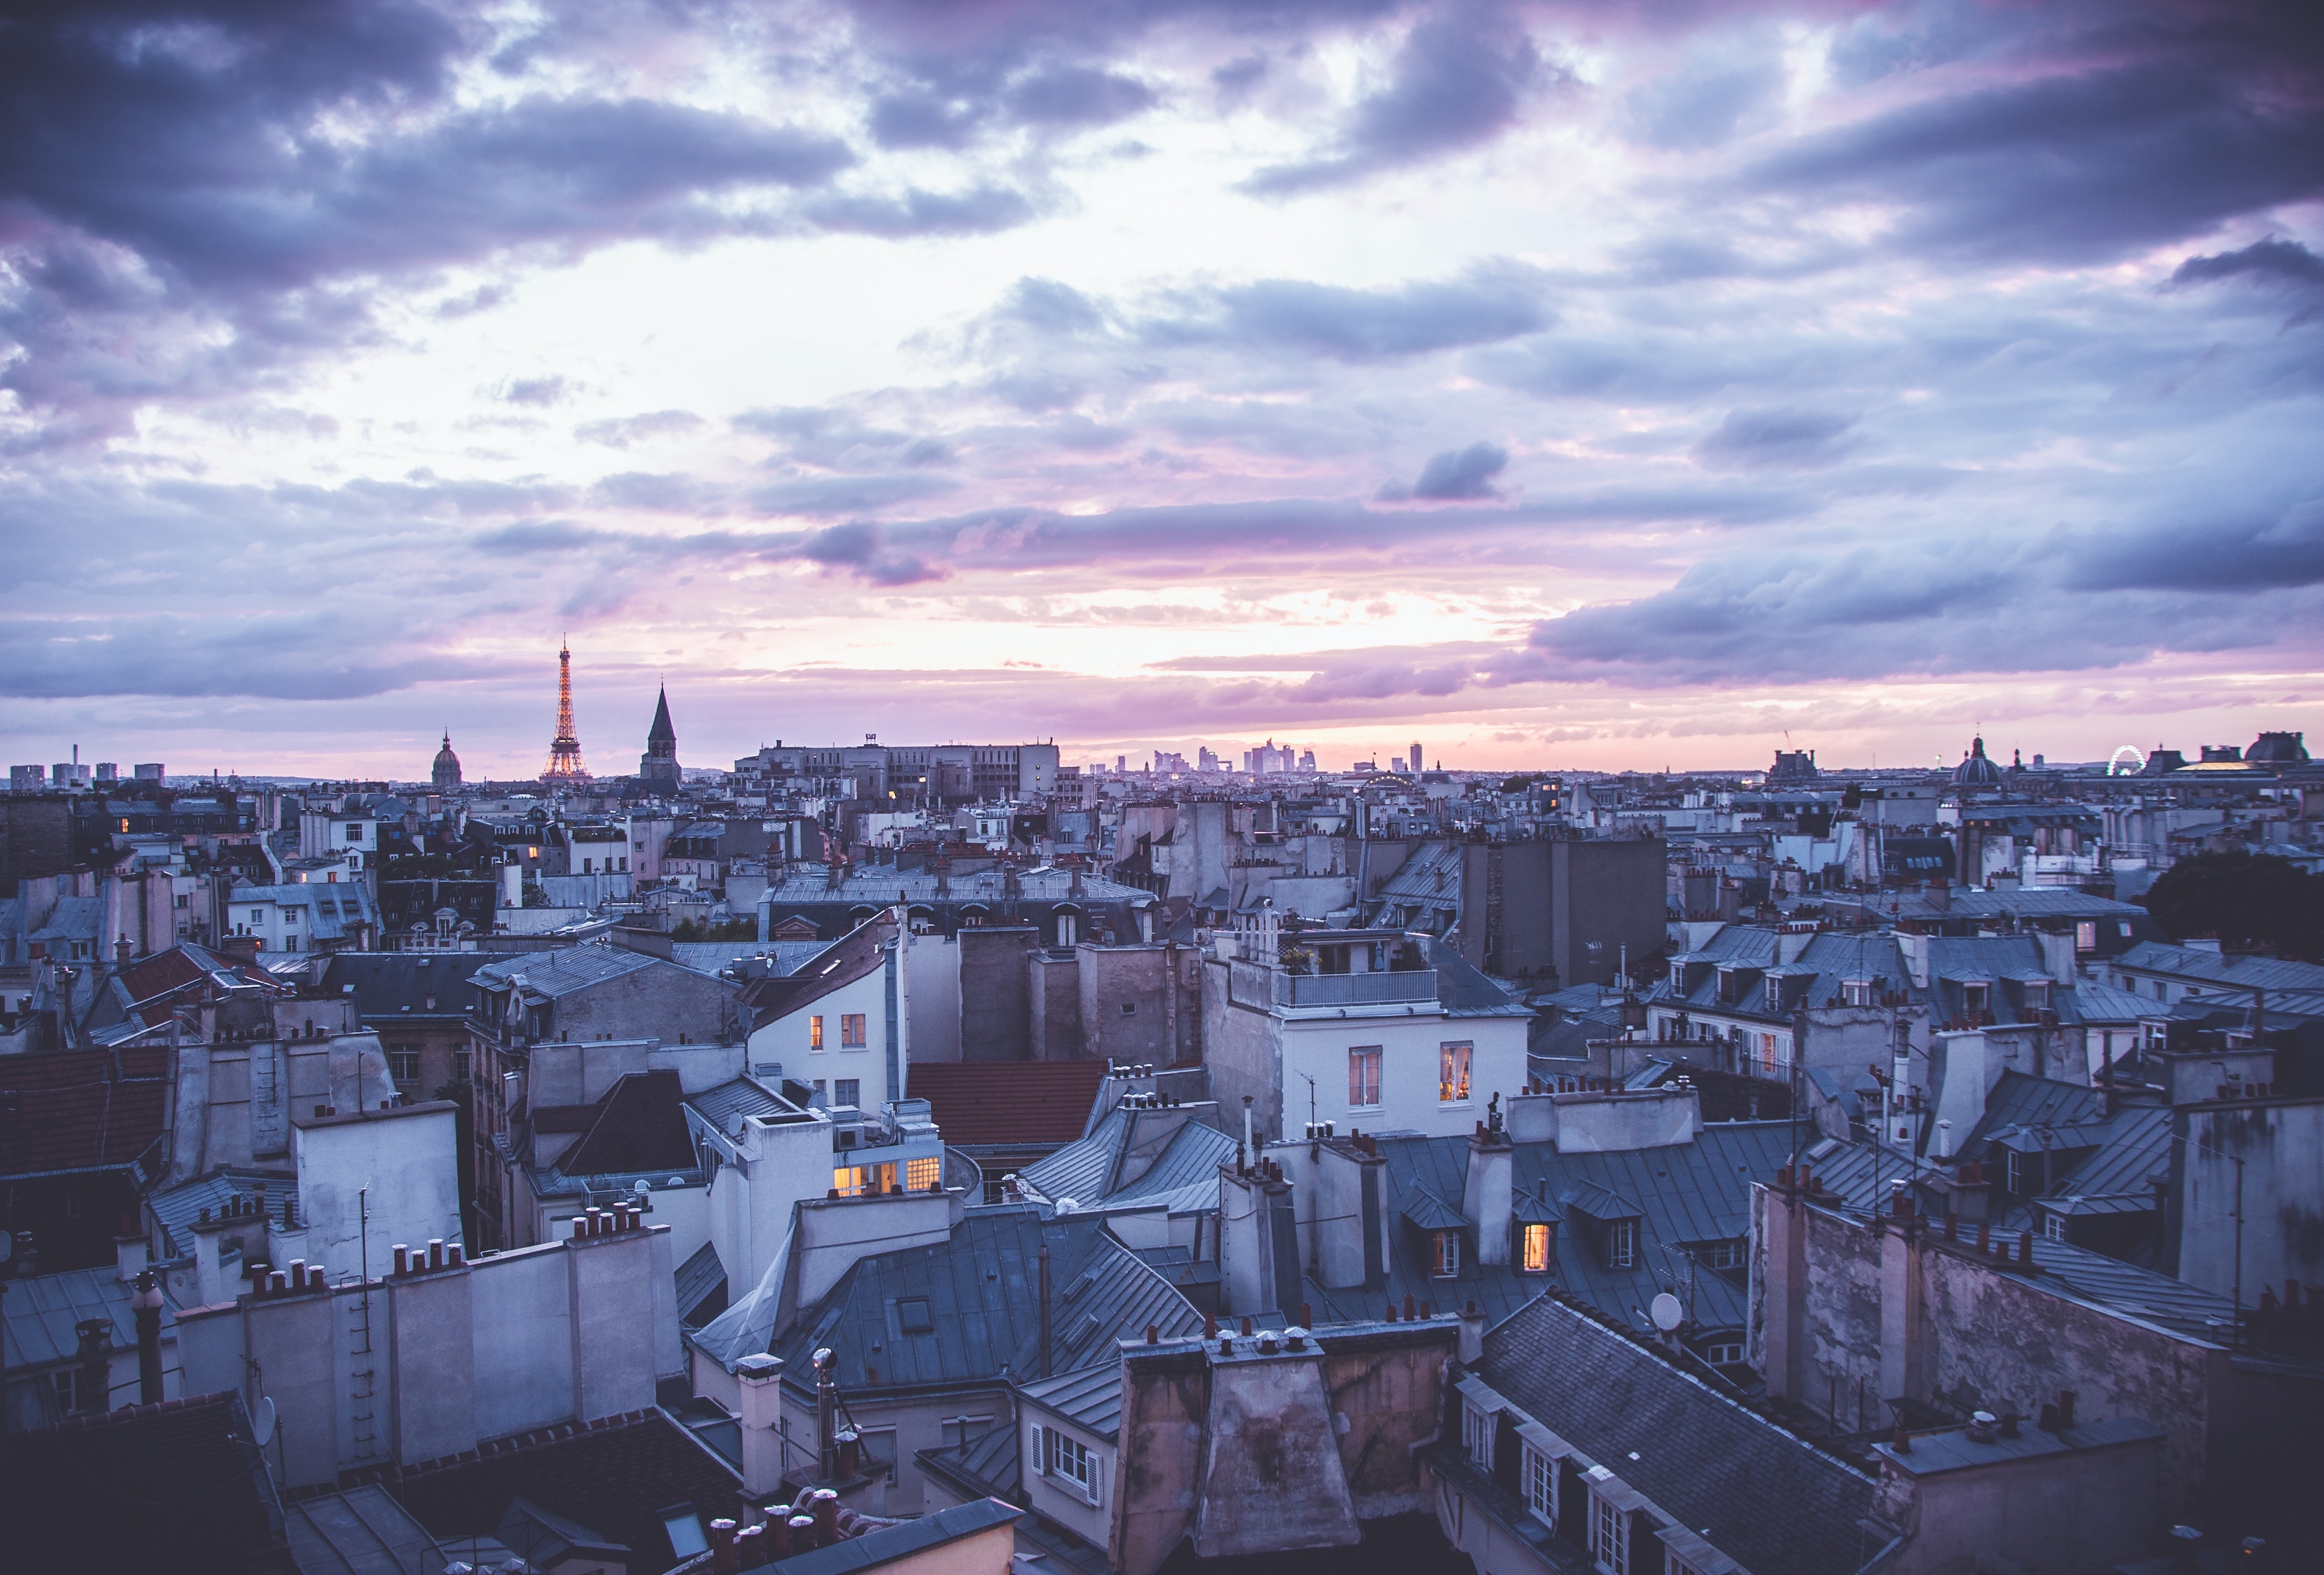 Want to learn French faster, a trip to the city of love will motivate you.